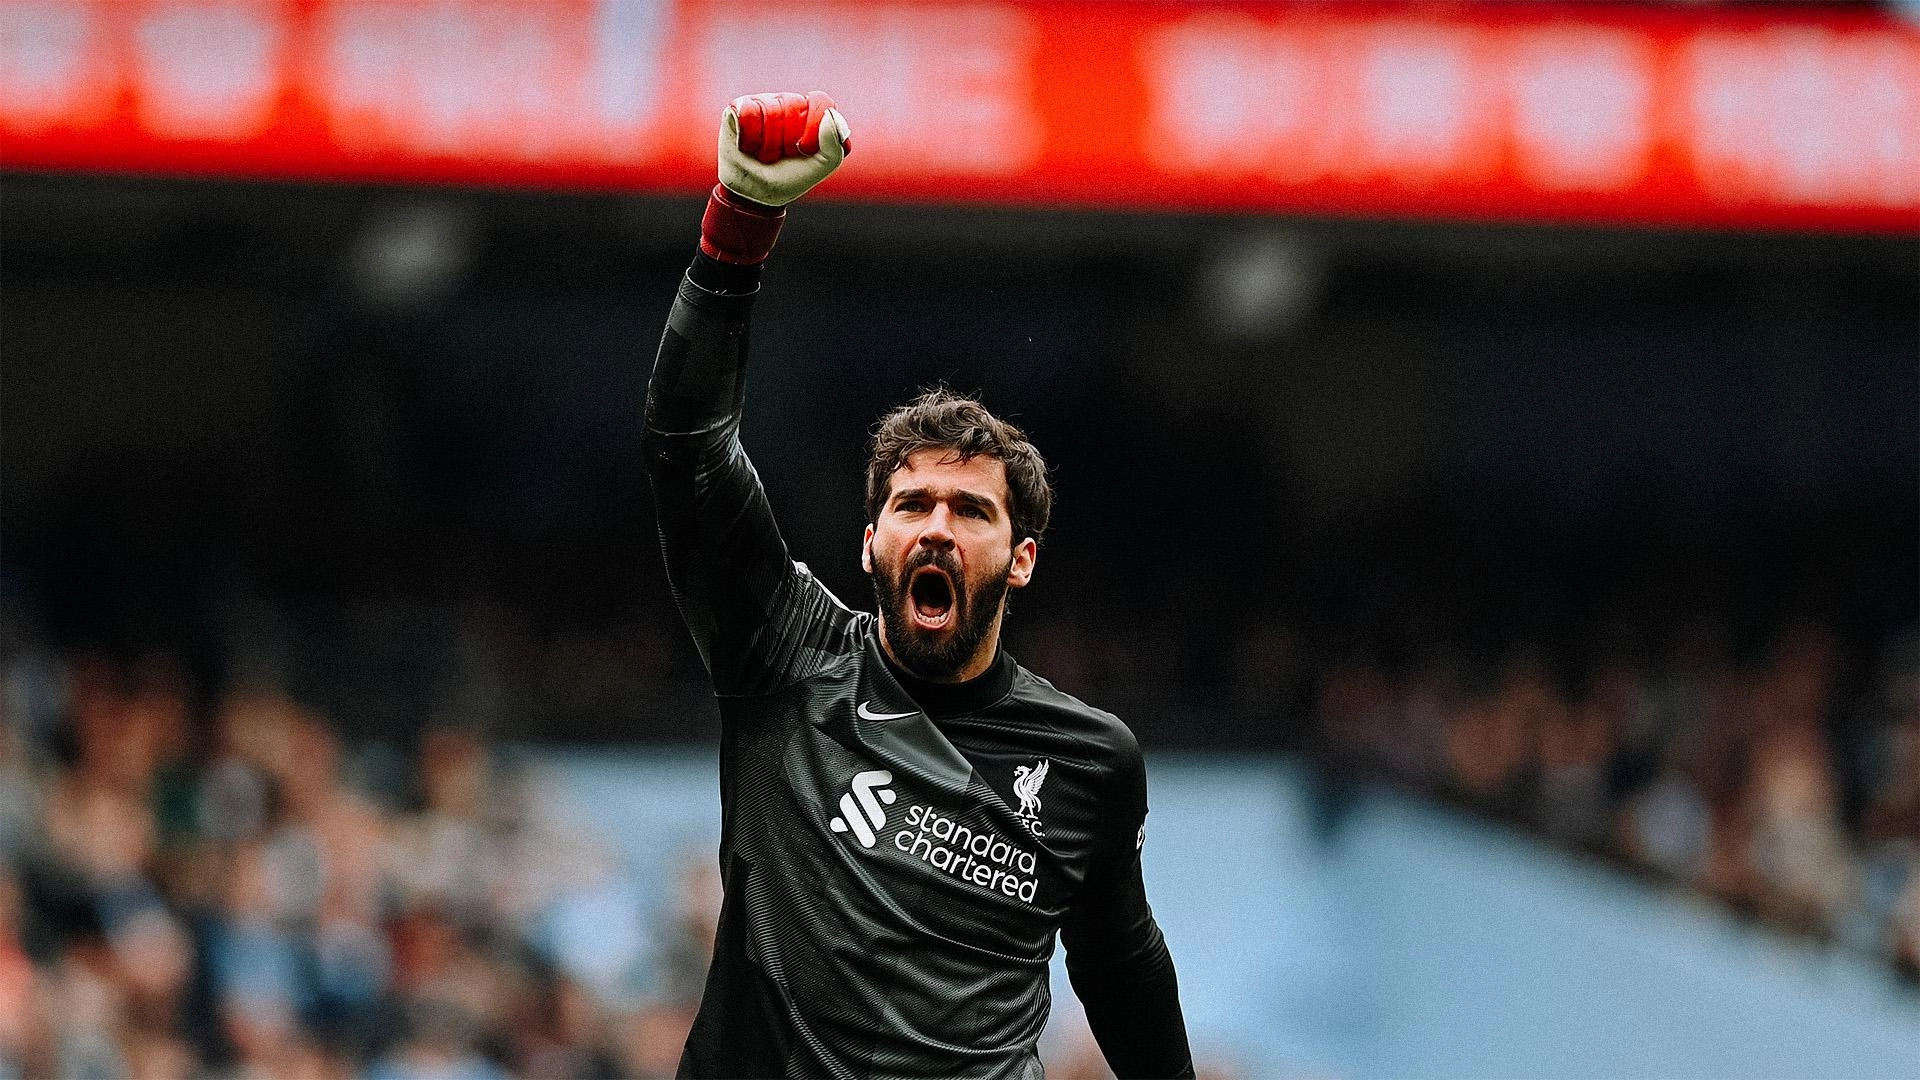 Liverpool have a new most important player, as Alisson Becker's